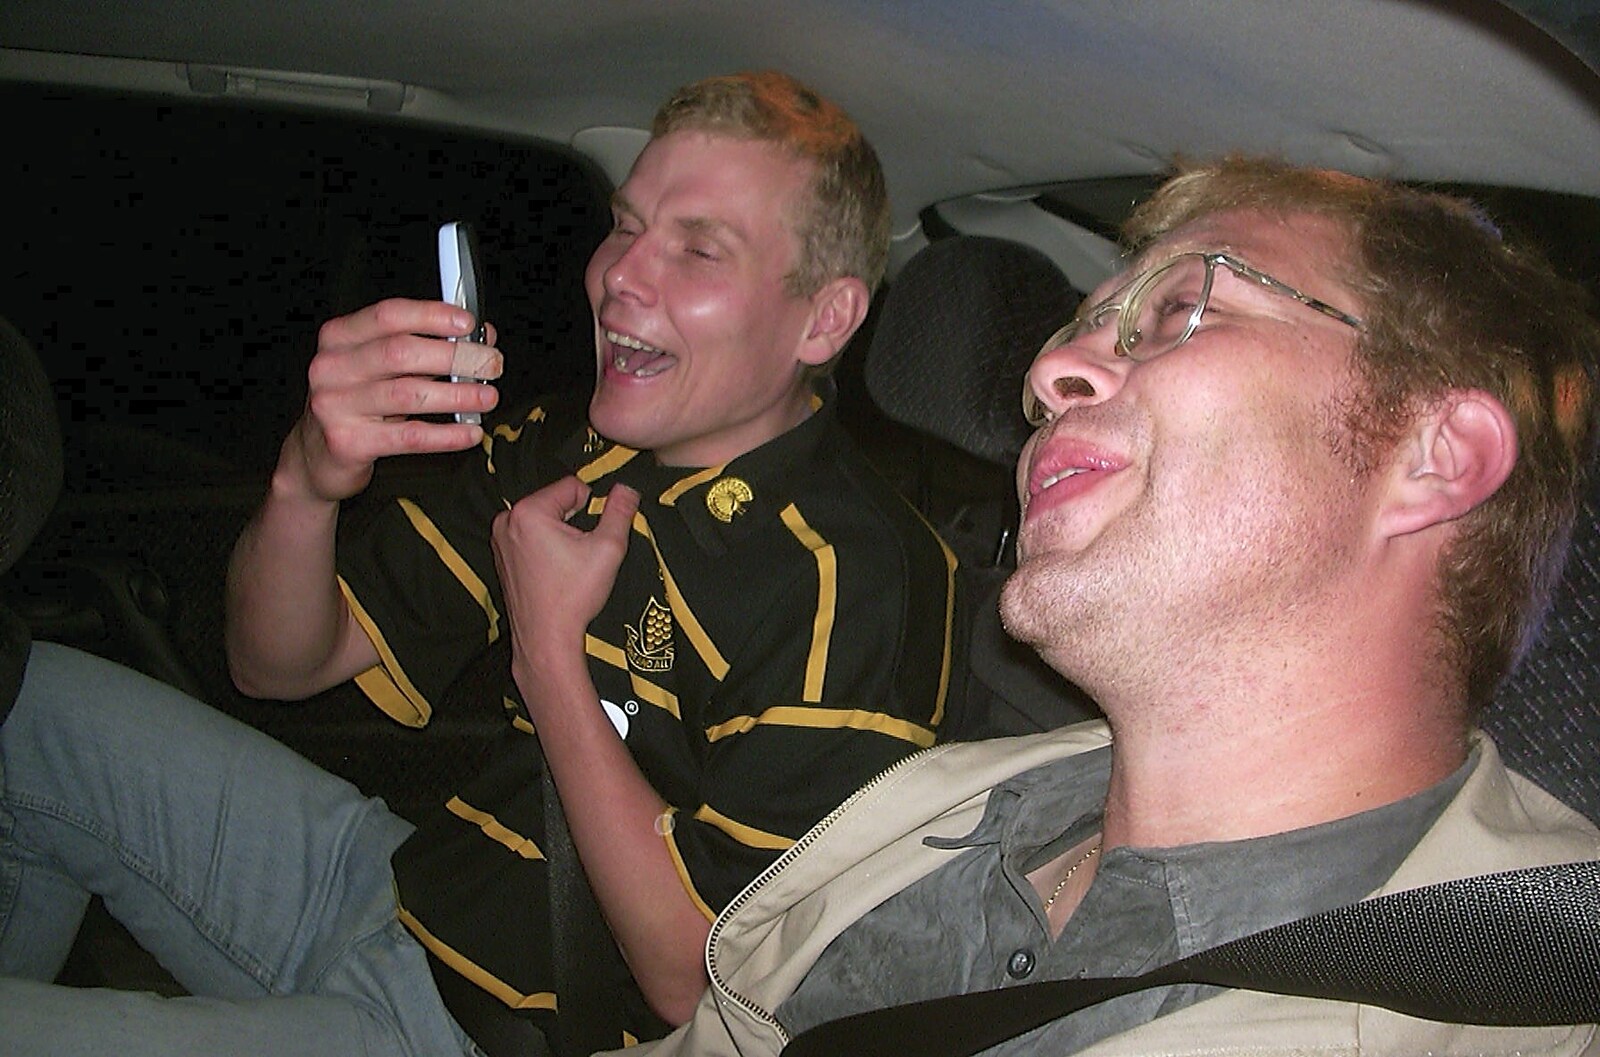 Bill and Marc in the car from Paul's Stag Night, Brome, Scole and Bressingham - Friday 20th August 2004